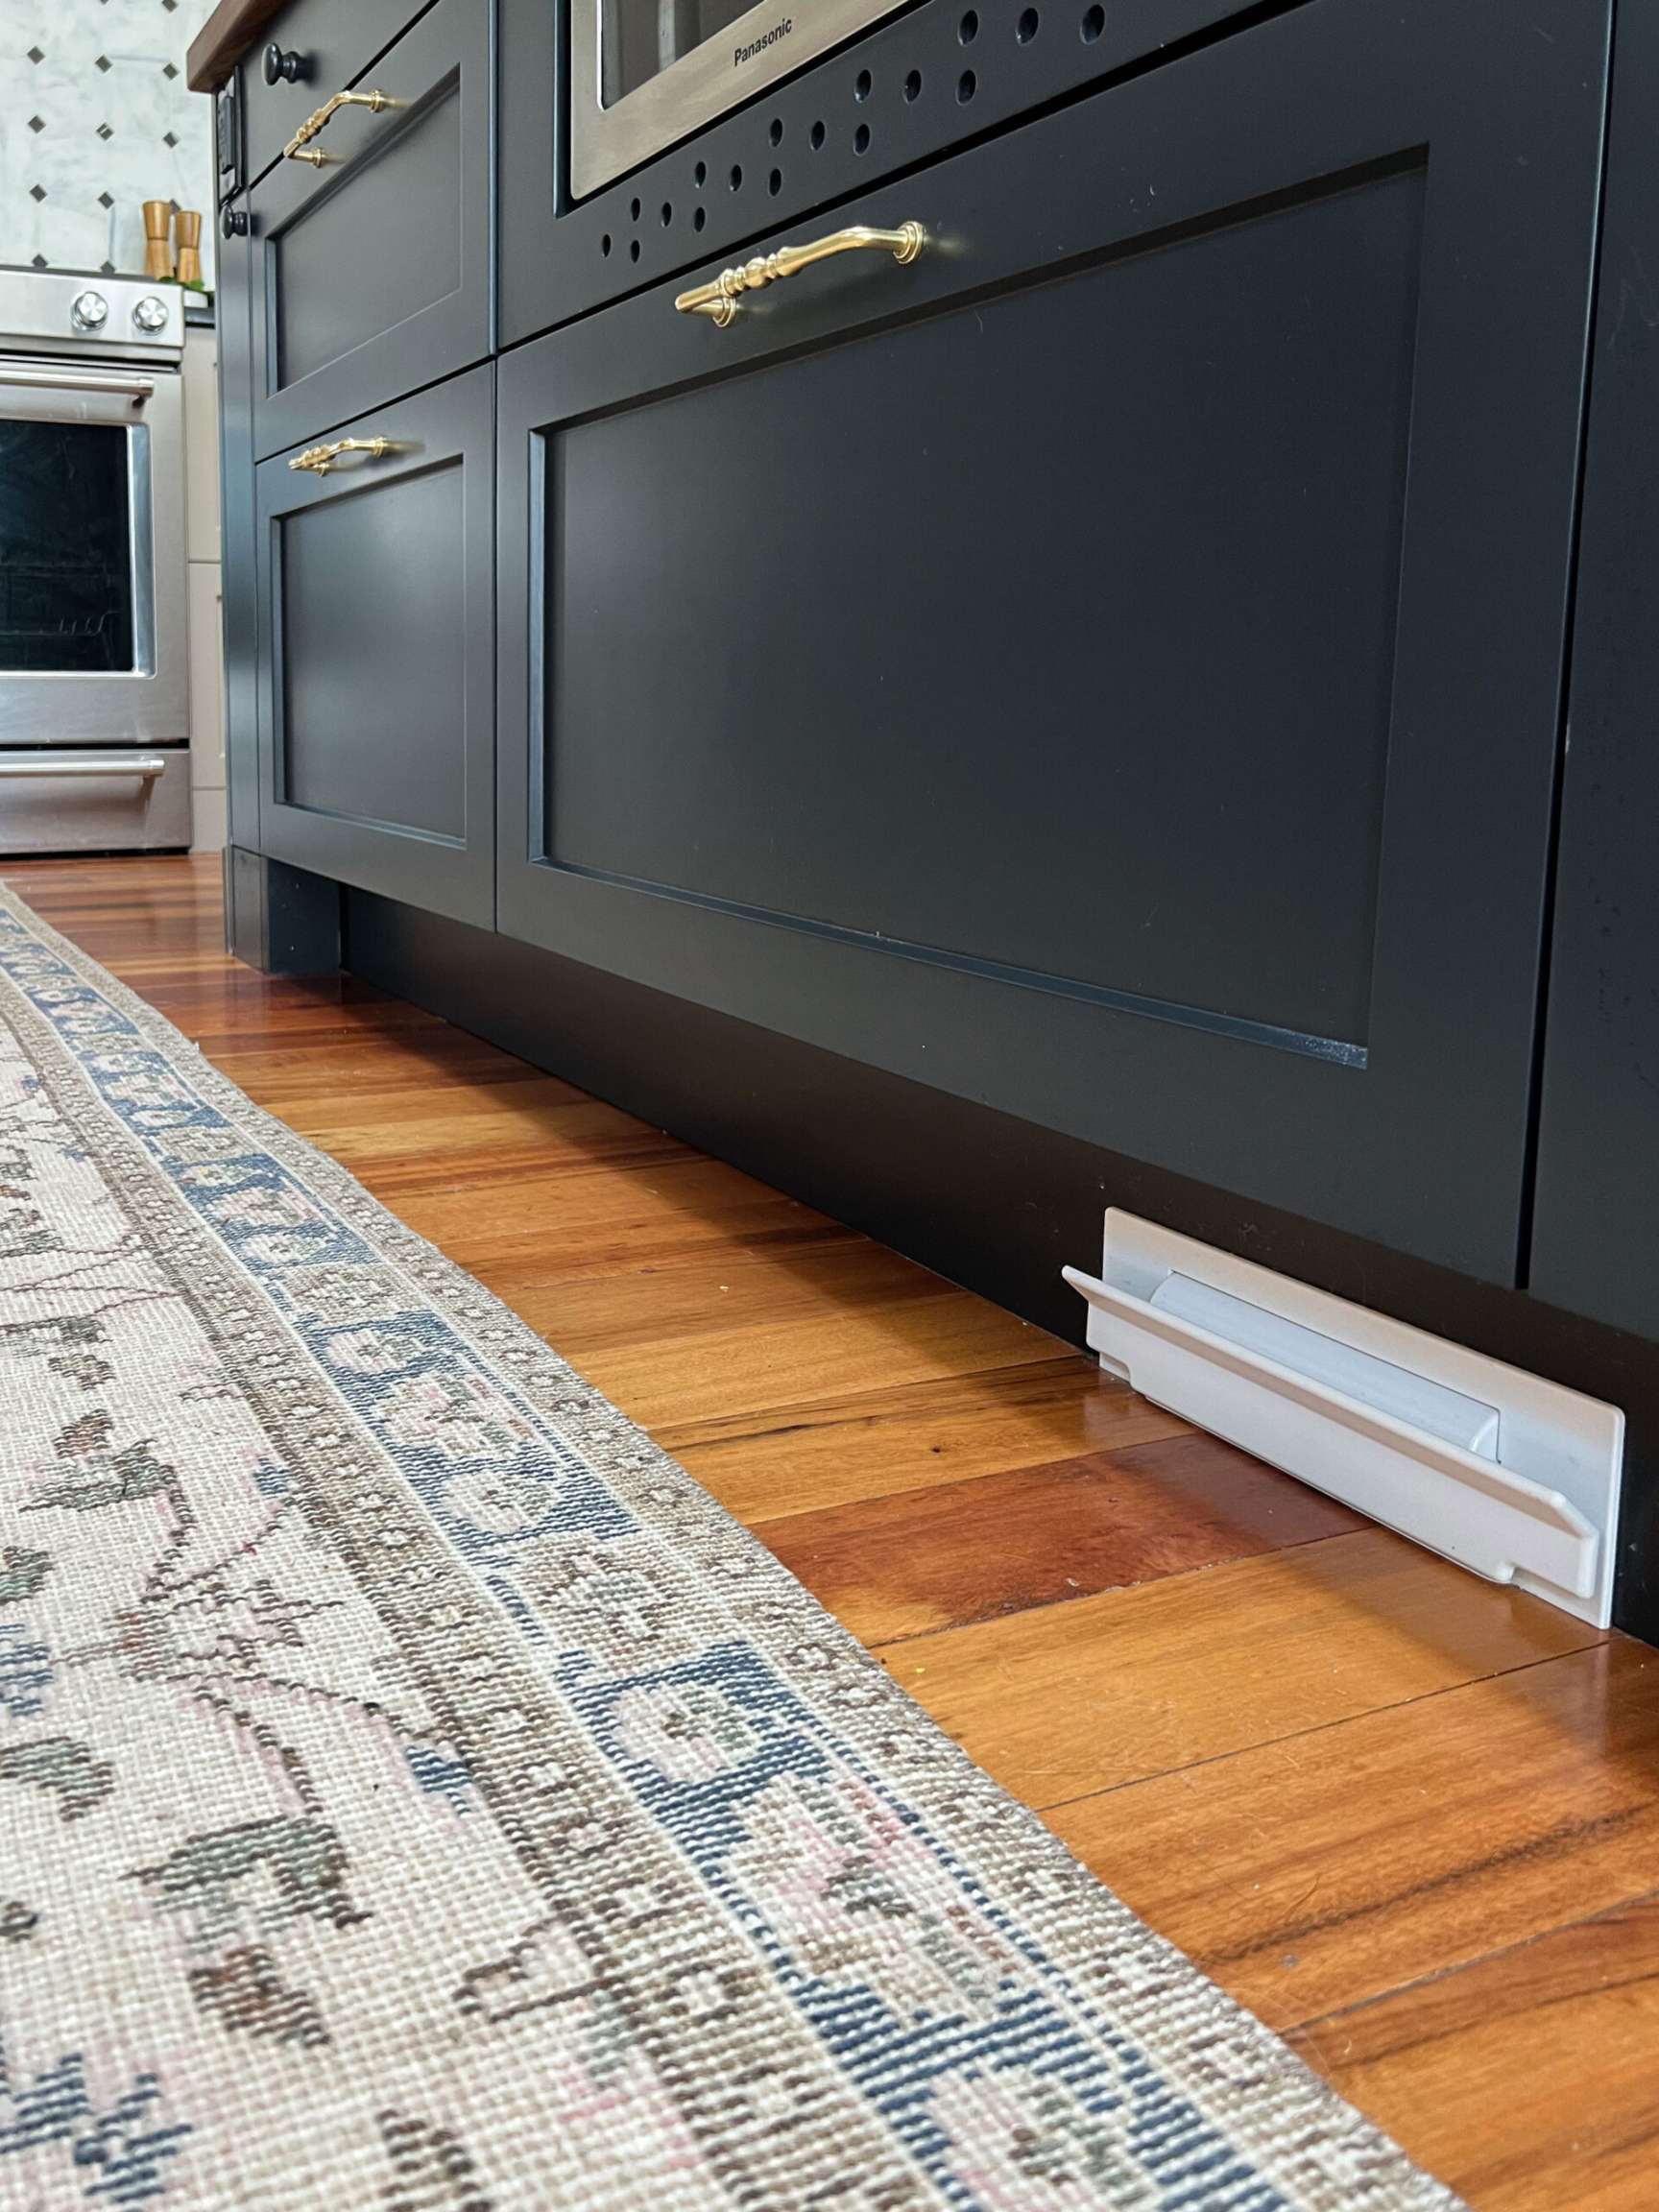 How to Design and Install Cabinet Toe Kicks for Your Kitchen